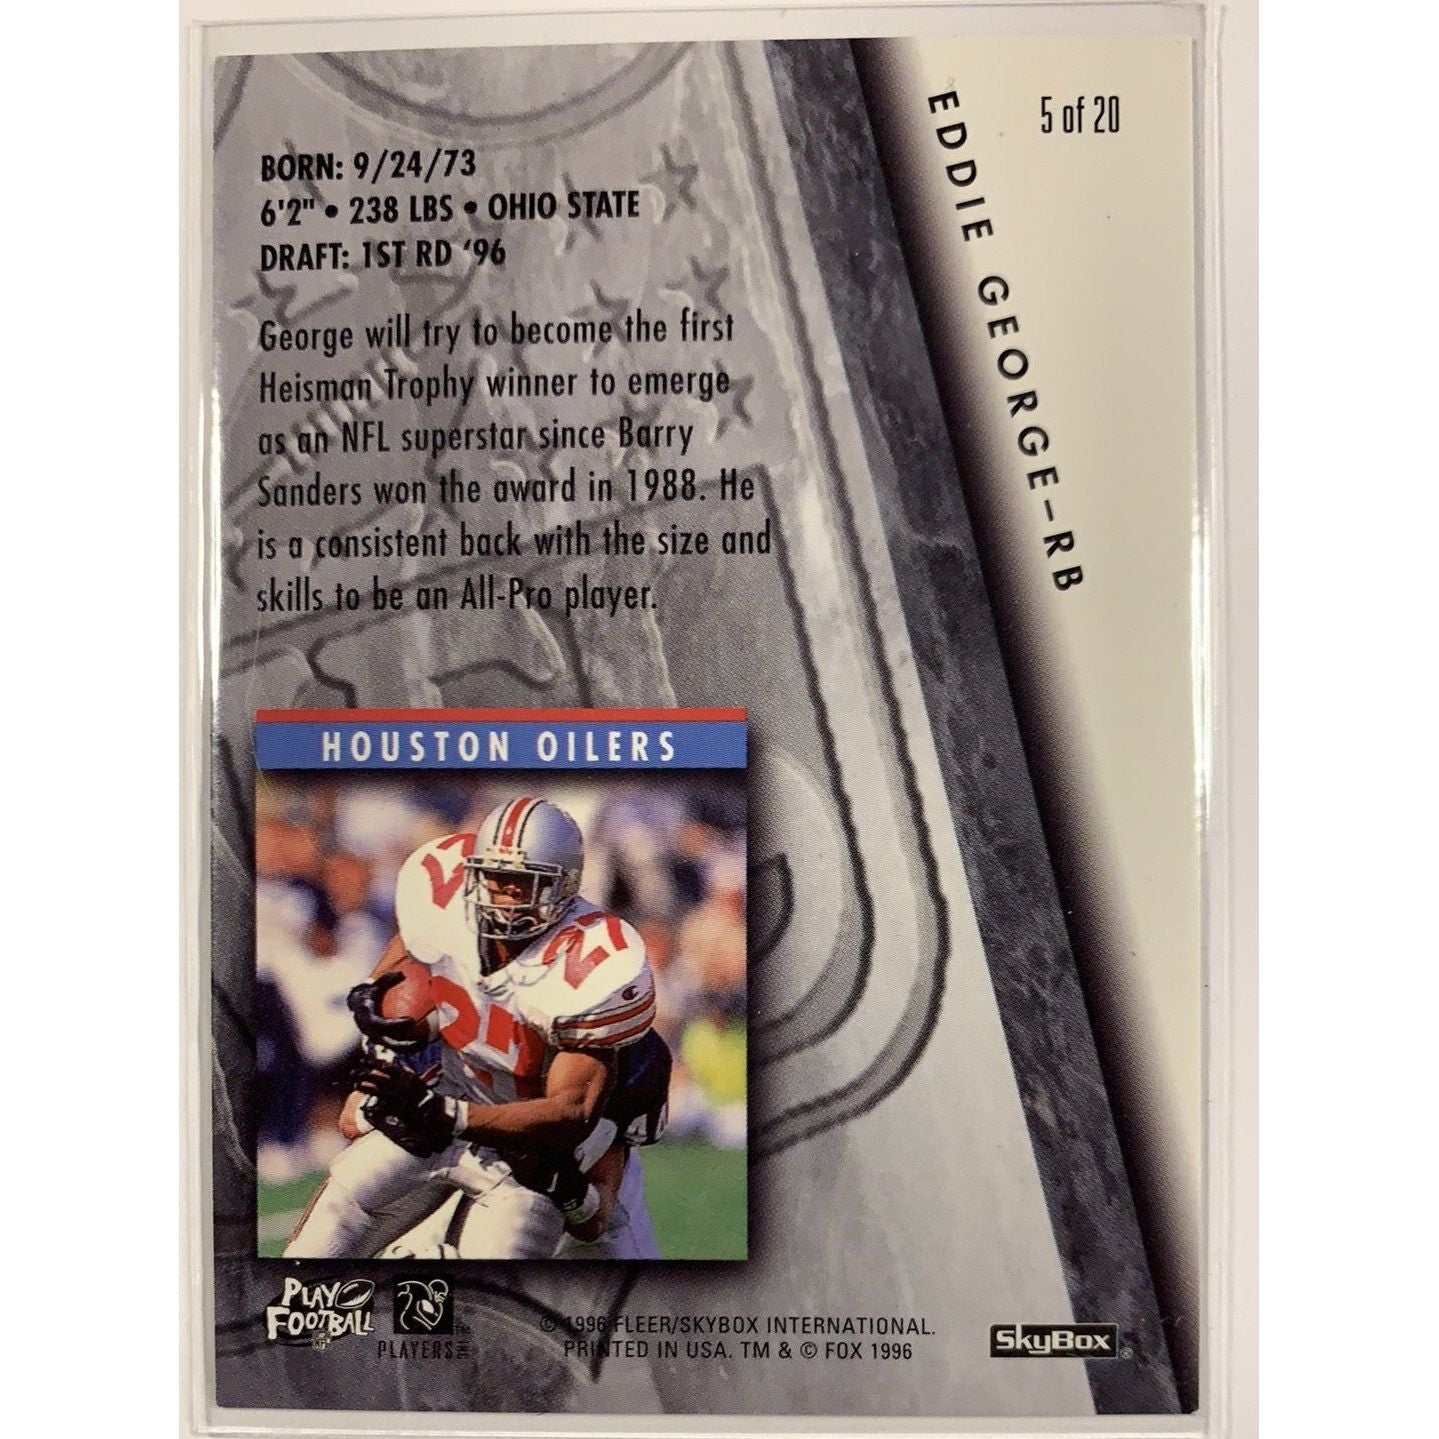  1996 Fleer Eddie George Same Game More Attitude  Local Legends Cards & Collectibles